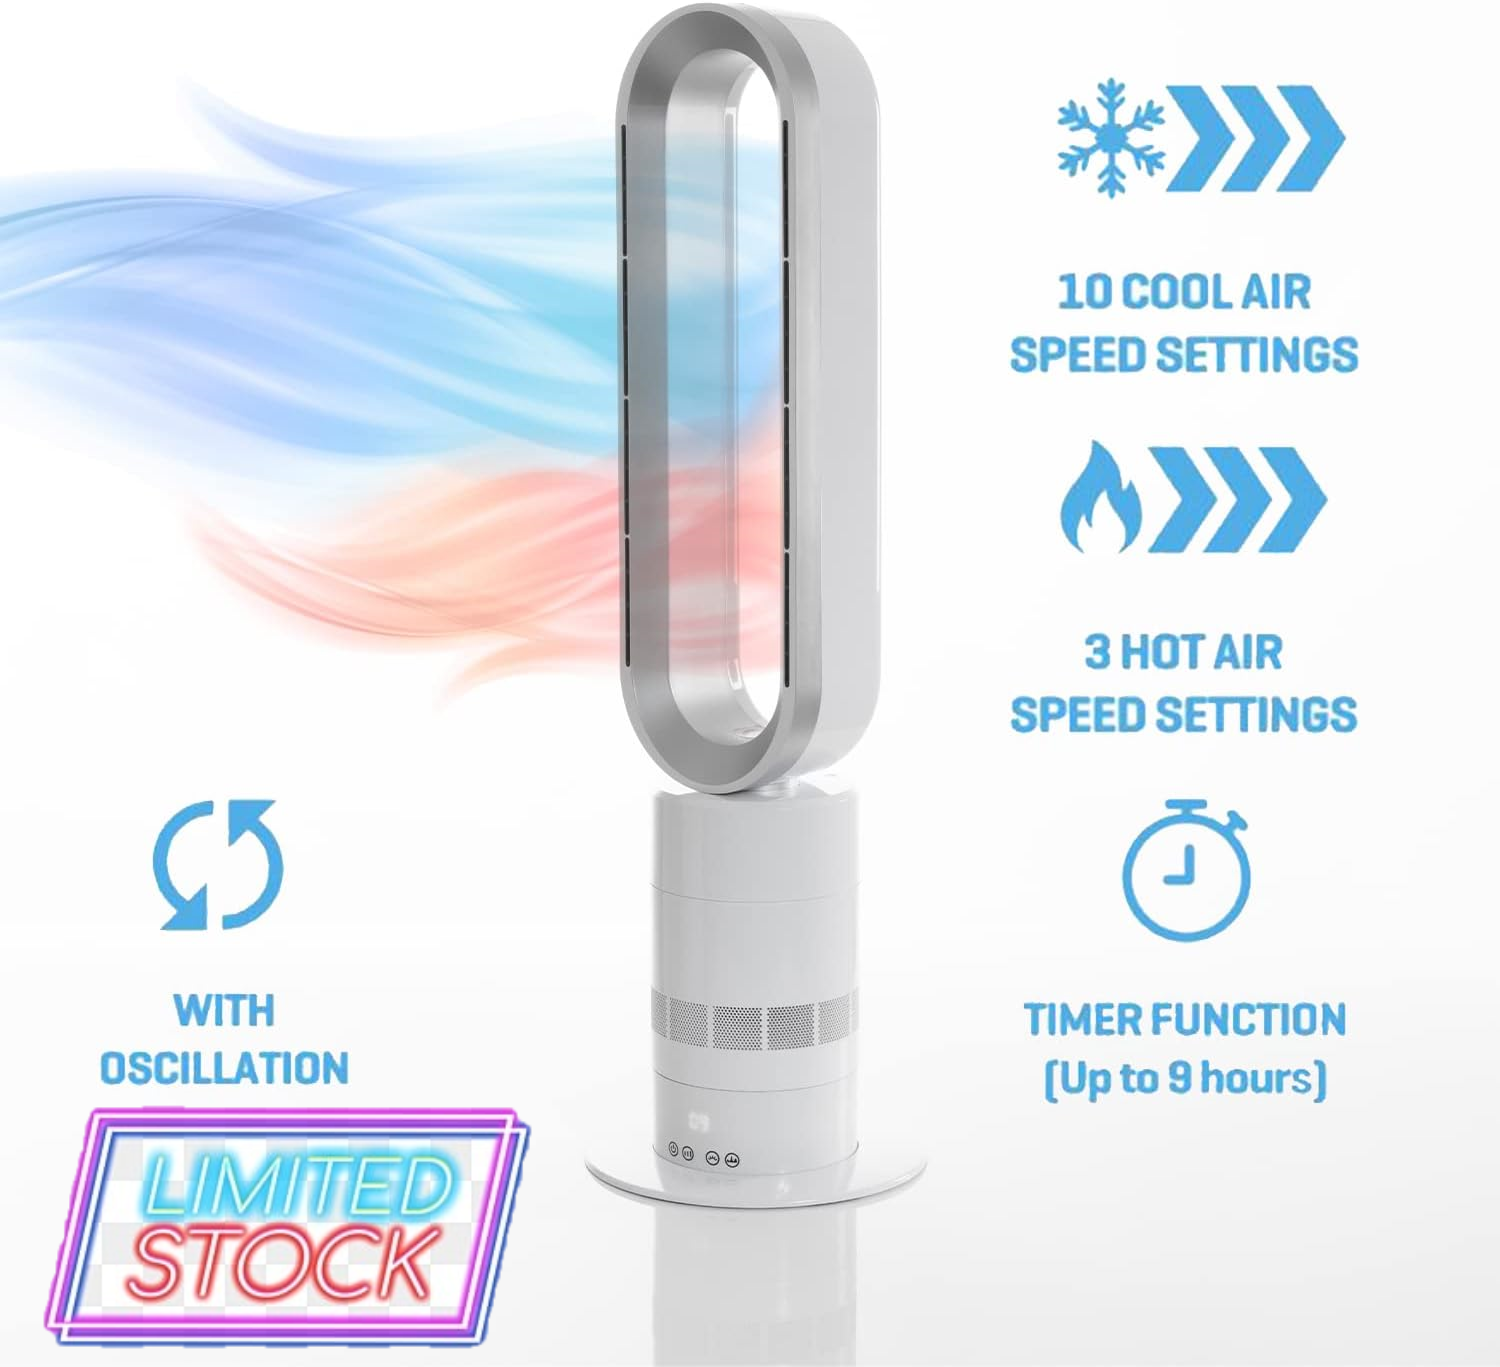 Bladeless Tower Fan & Heater with Remote Control £149.99